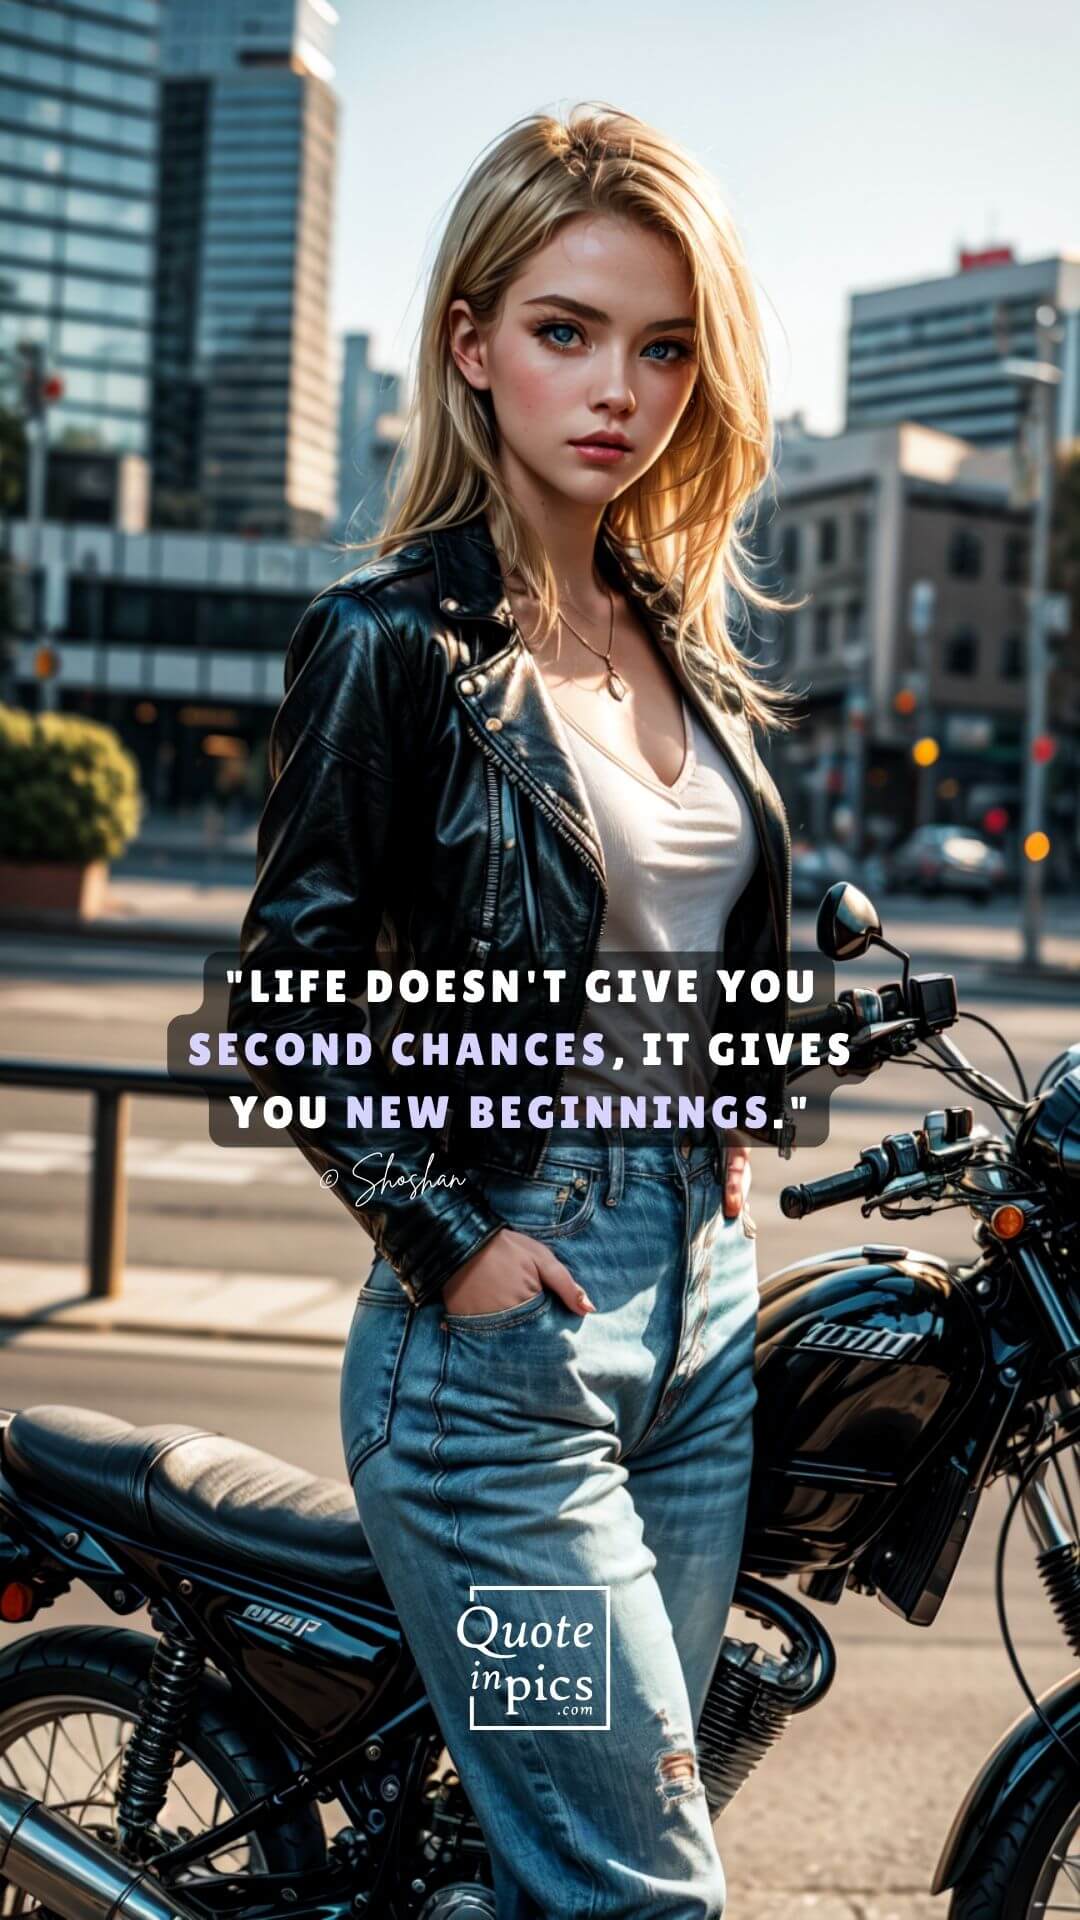 Life doesn't give you second chances, it gives you new beginnings.